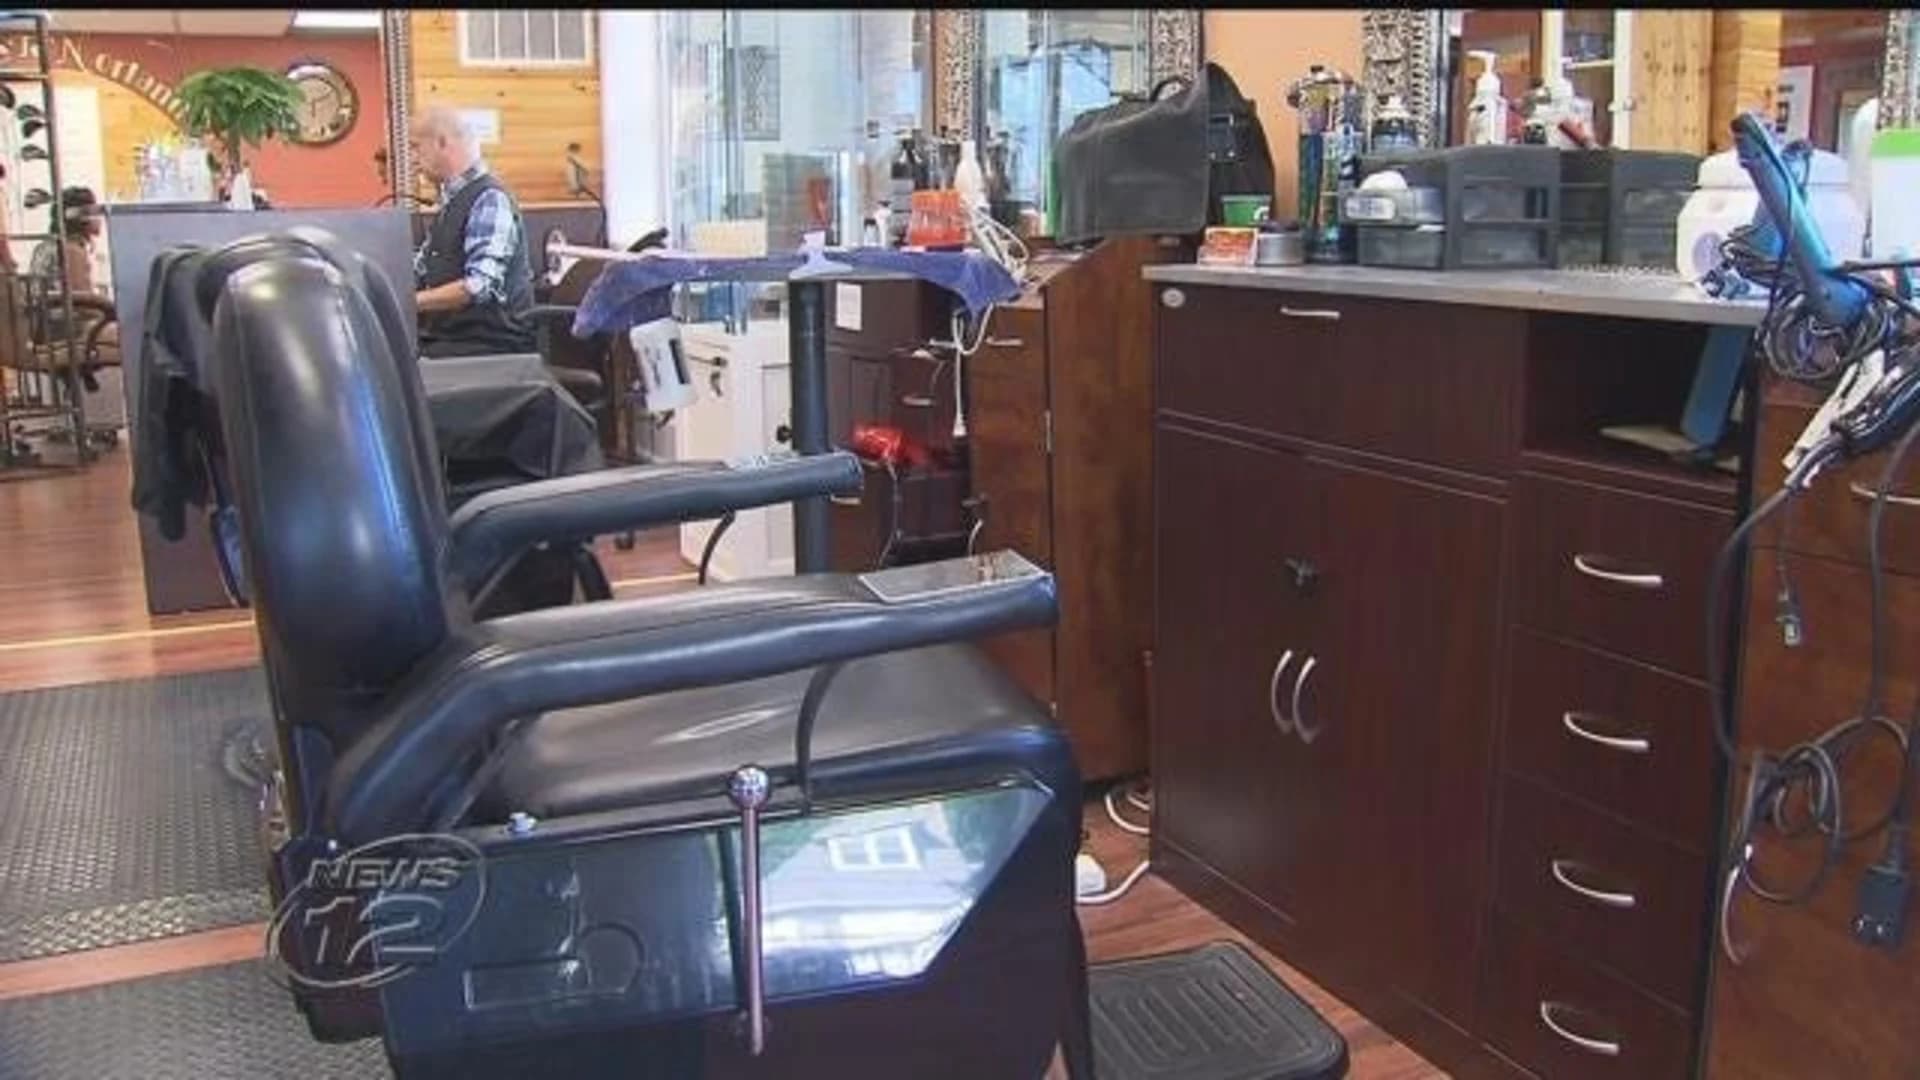 Beauty salon licensing fees outrage owners